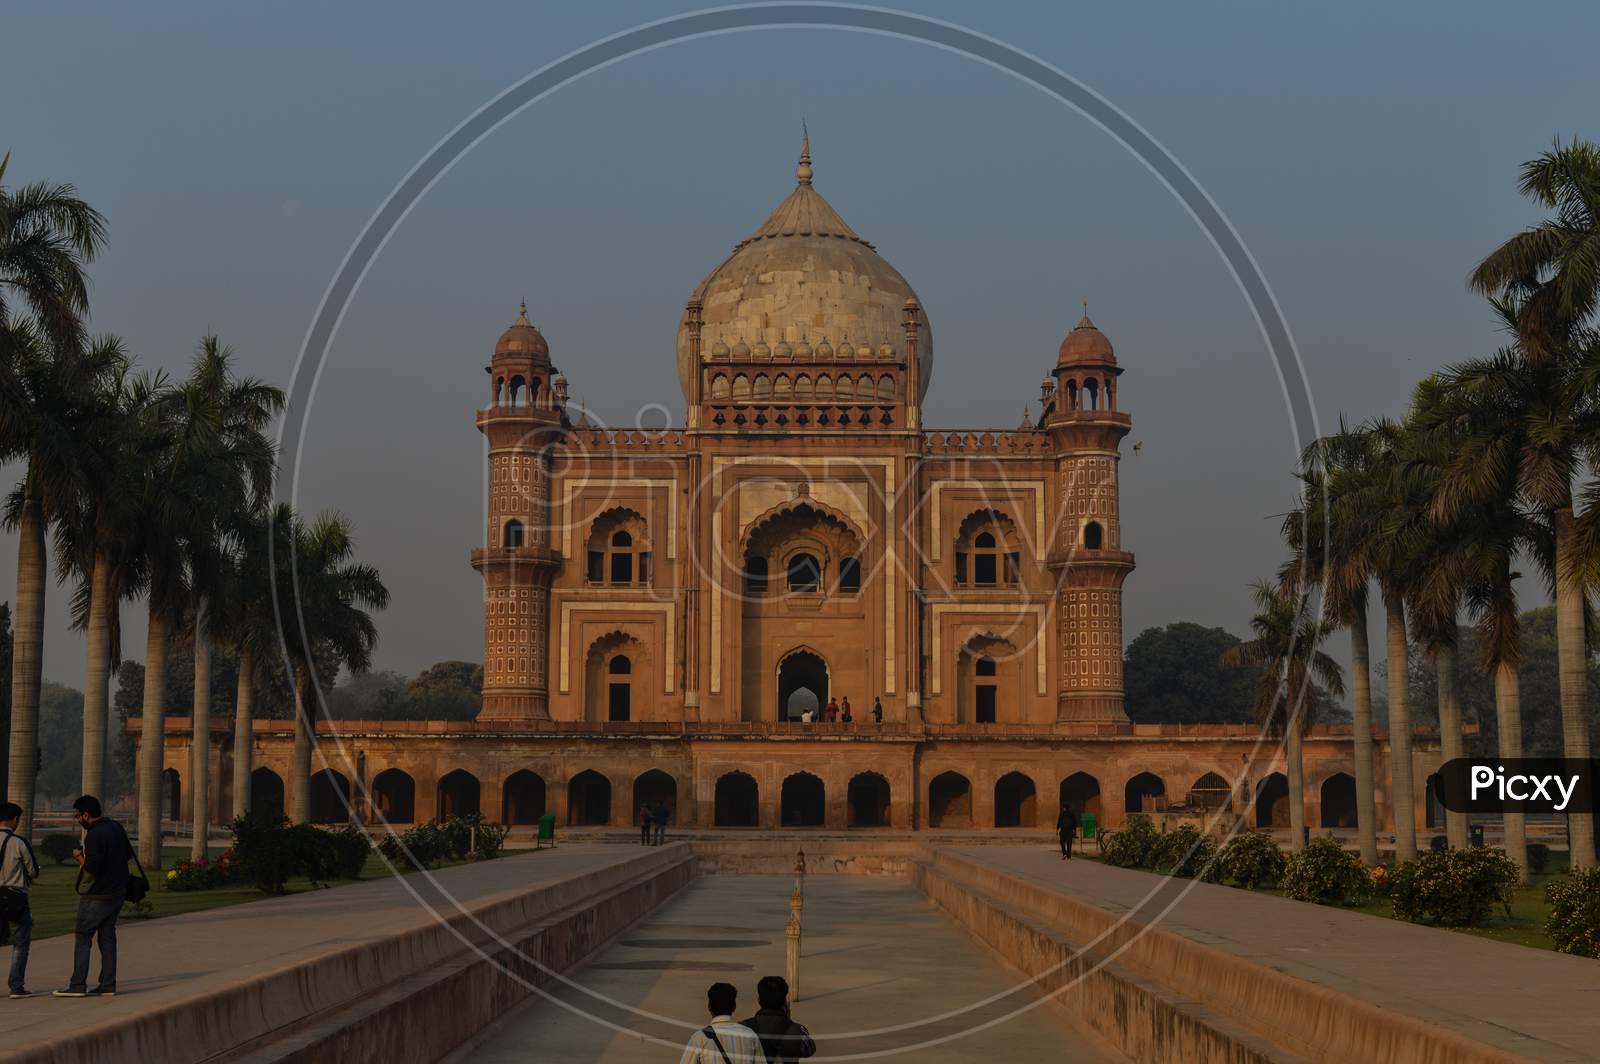 A Bunch Of Photography Students Standing And Taking Picture In-Front Of Safdarjung Tomb Memorial At Winter Morning.